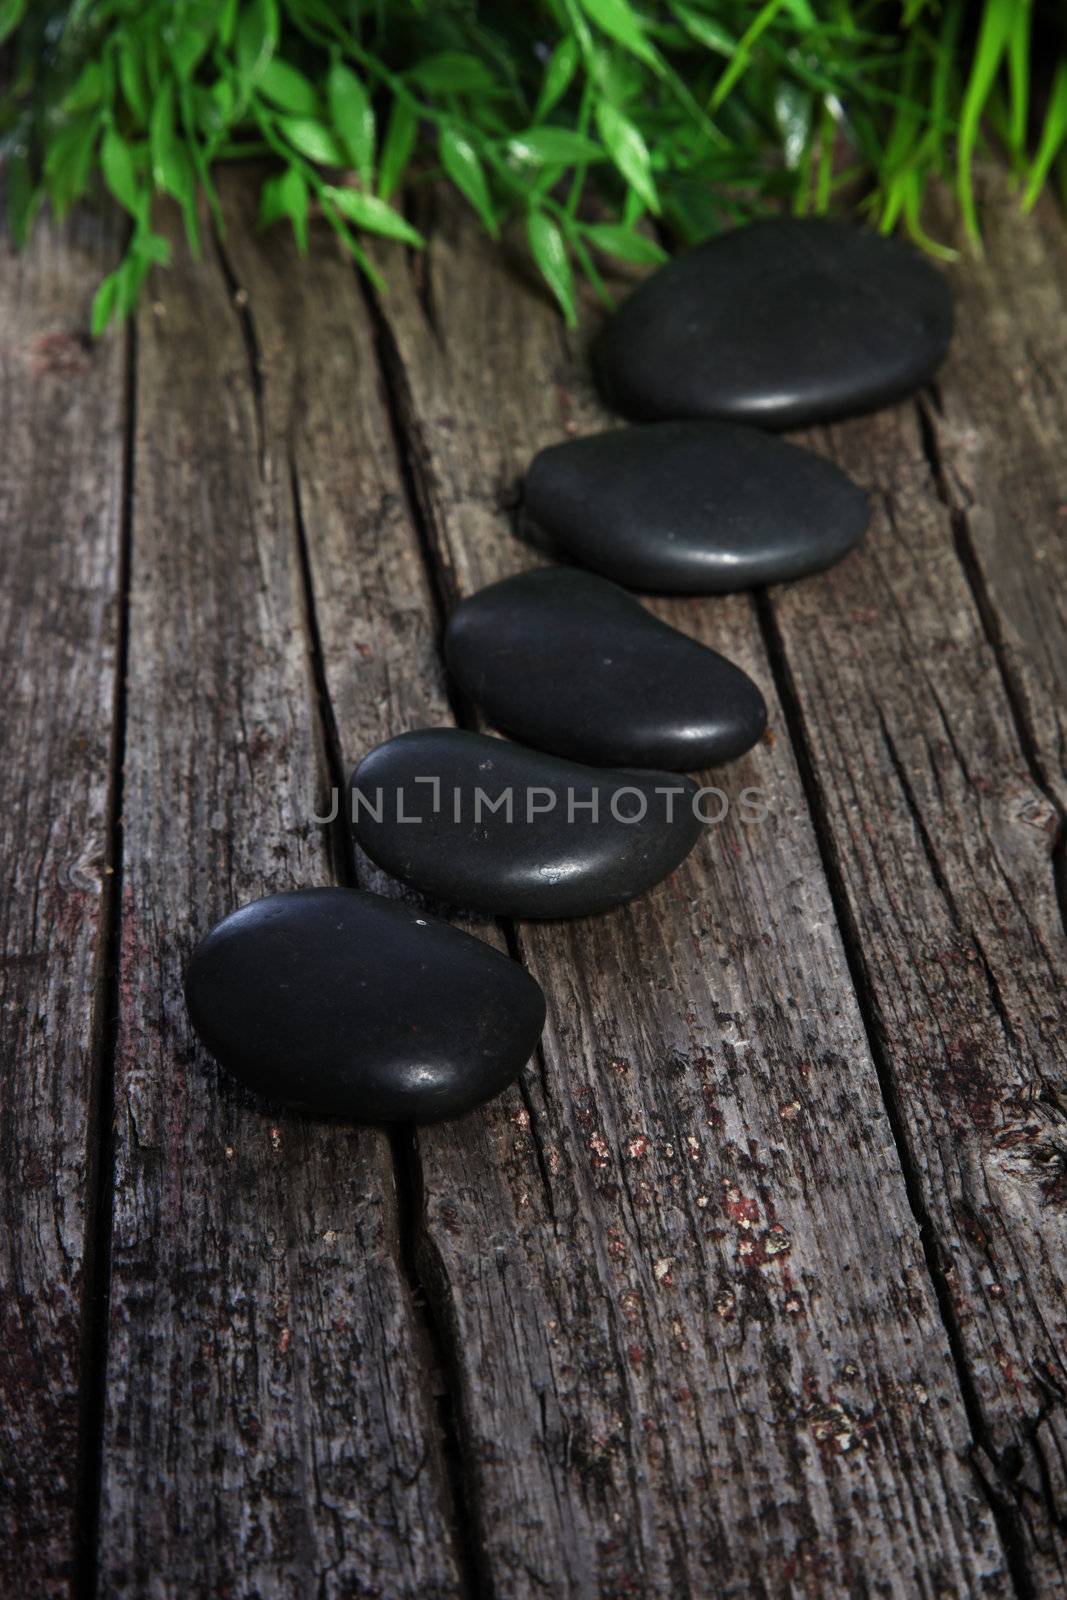 Basalt spa massage stones neatly arranged in a diagonal line on an old wooden surface with green leaves